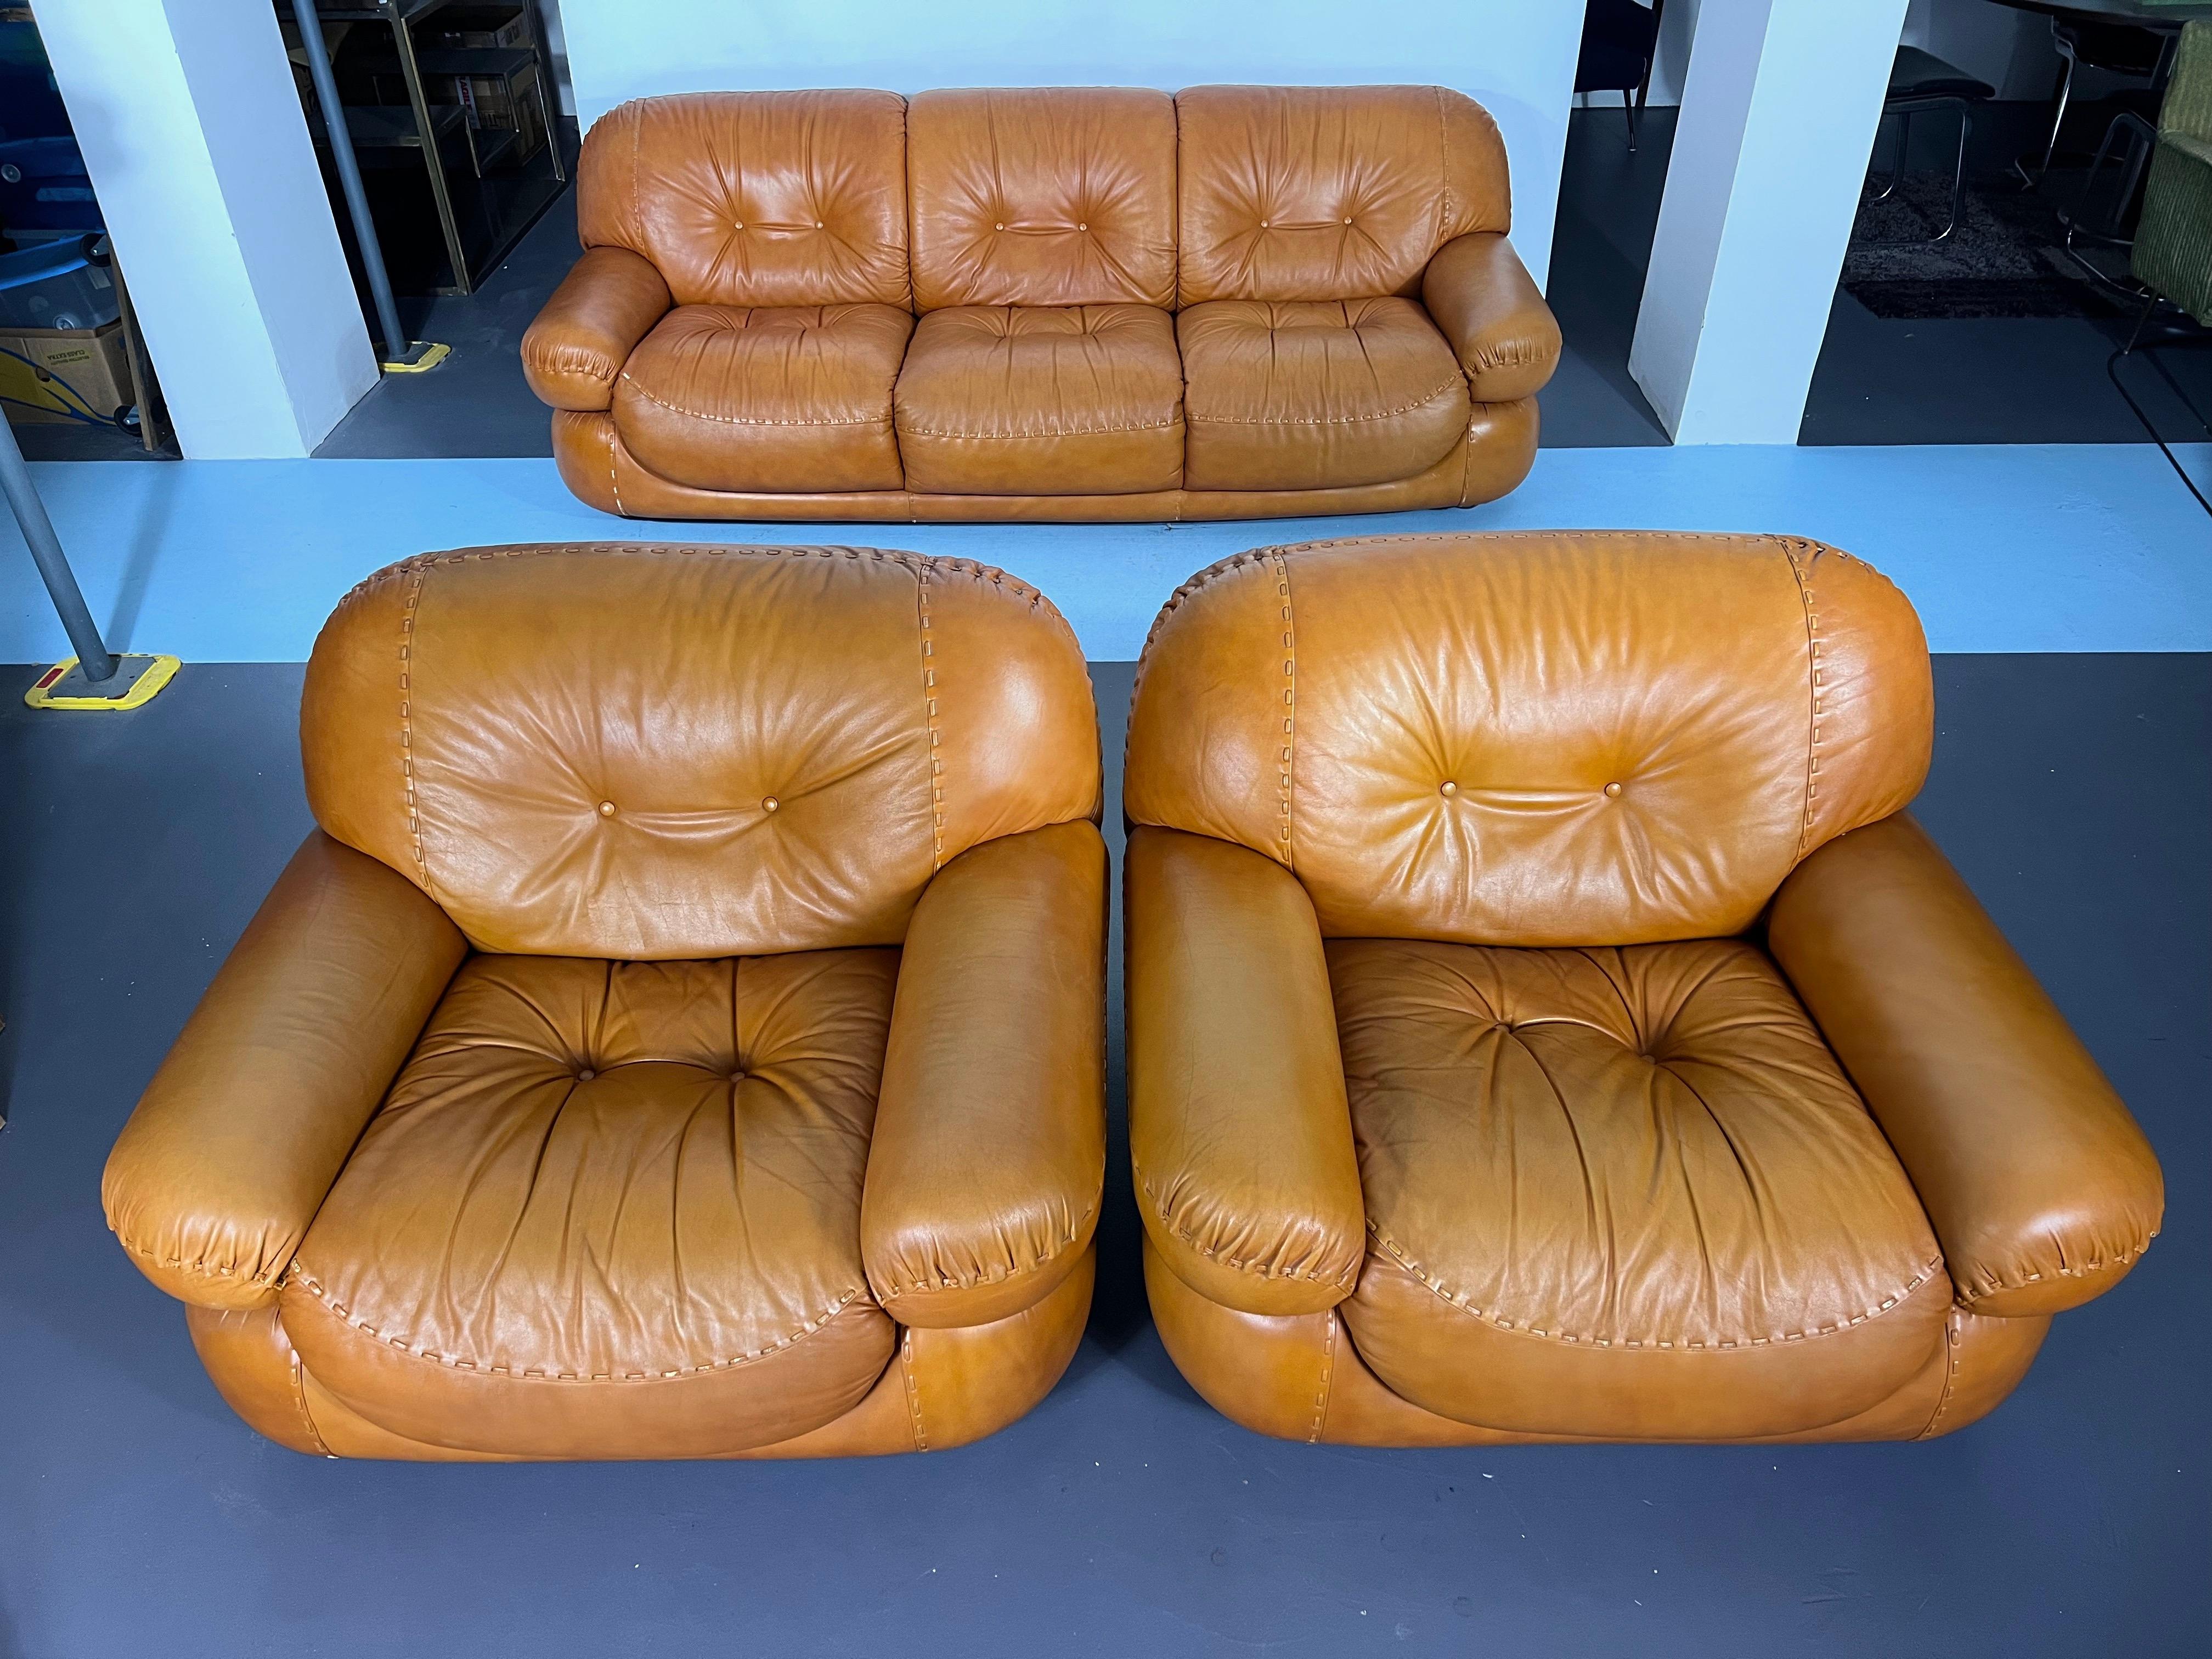 Vintage Sofa Set in Cognac Leather by Sapporo for Mobil Girgi, Italy, 1970s For Sale 5